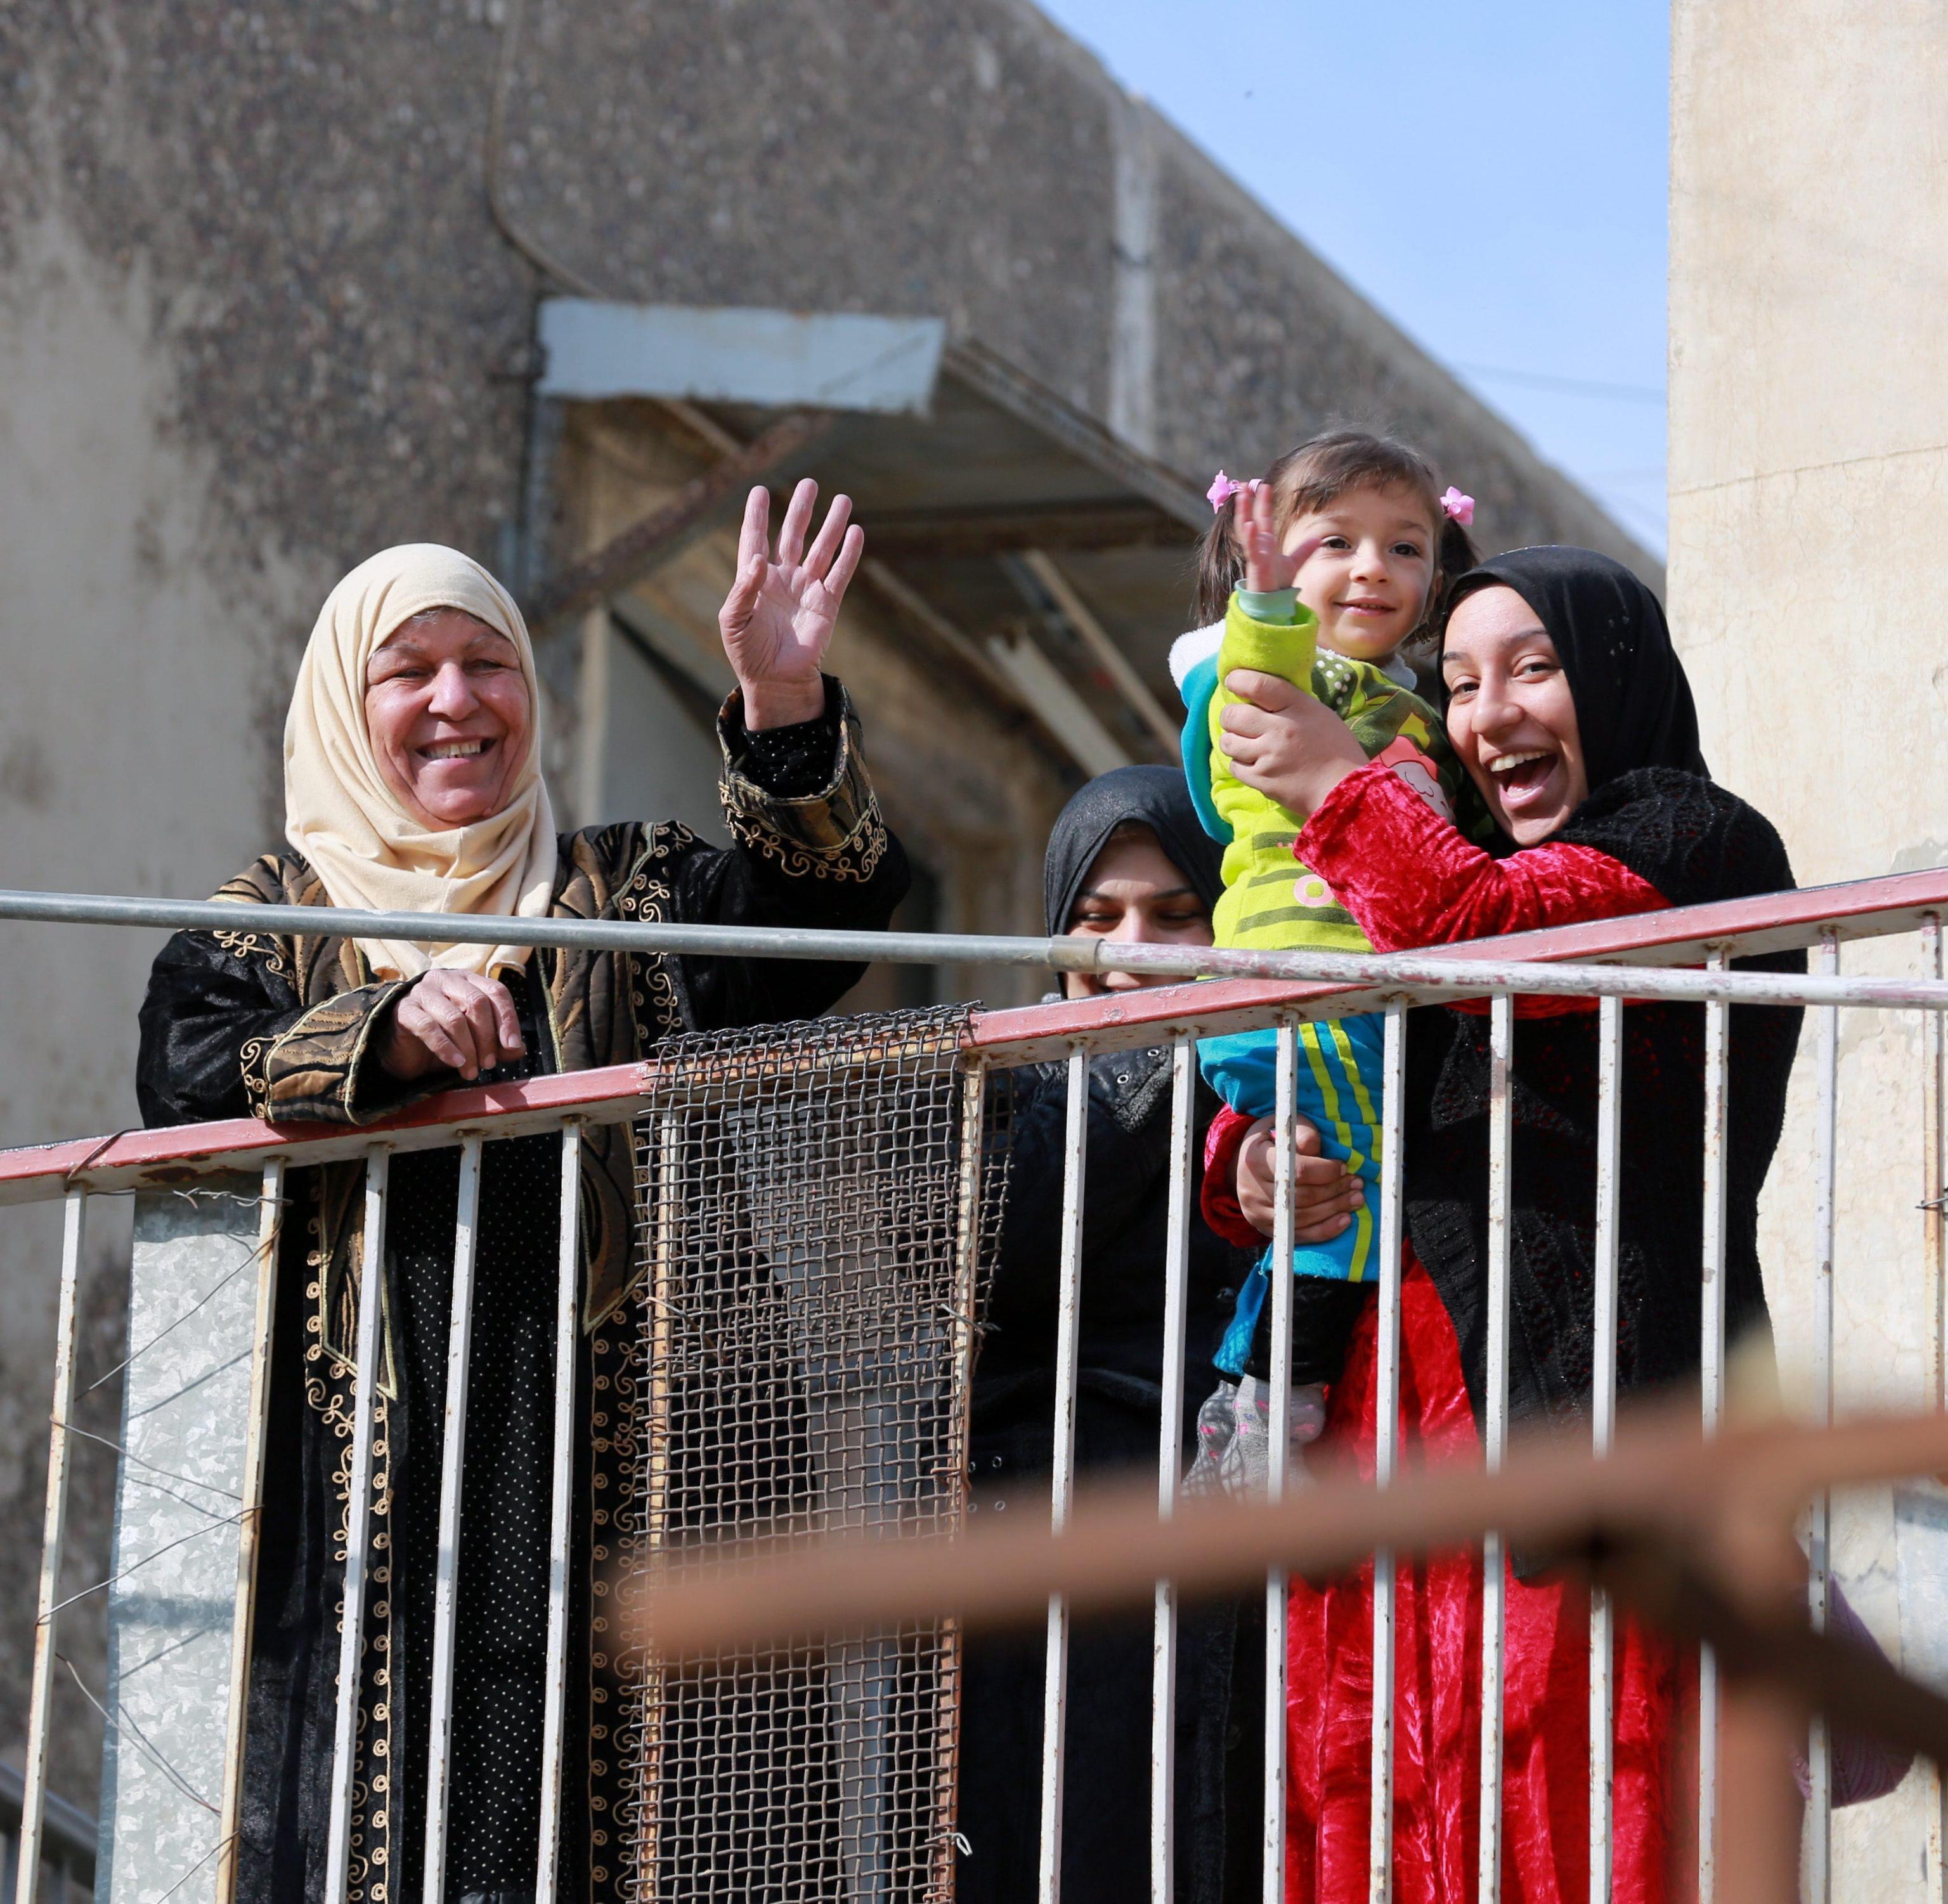 epa05649643 Iraqi women from Mosul greet members of Iraqi special forces as they walk in the recently recaptured district of Shoqaq Khadraa, eastern Mosul, Iraq, 27 November 2016. Iraqi security forces recaptured two districts in Mosul as operations continue to liberate the city from Islamic State militants (IS), Iraqi officers said. EPA/AHMED JALIL